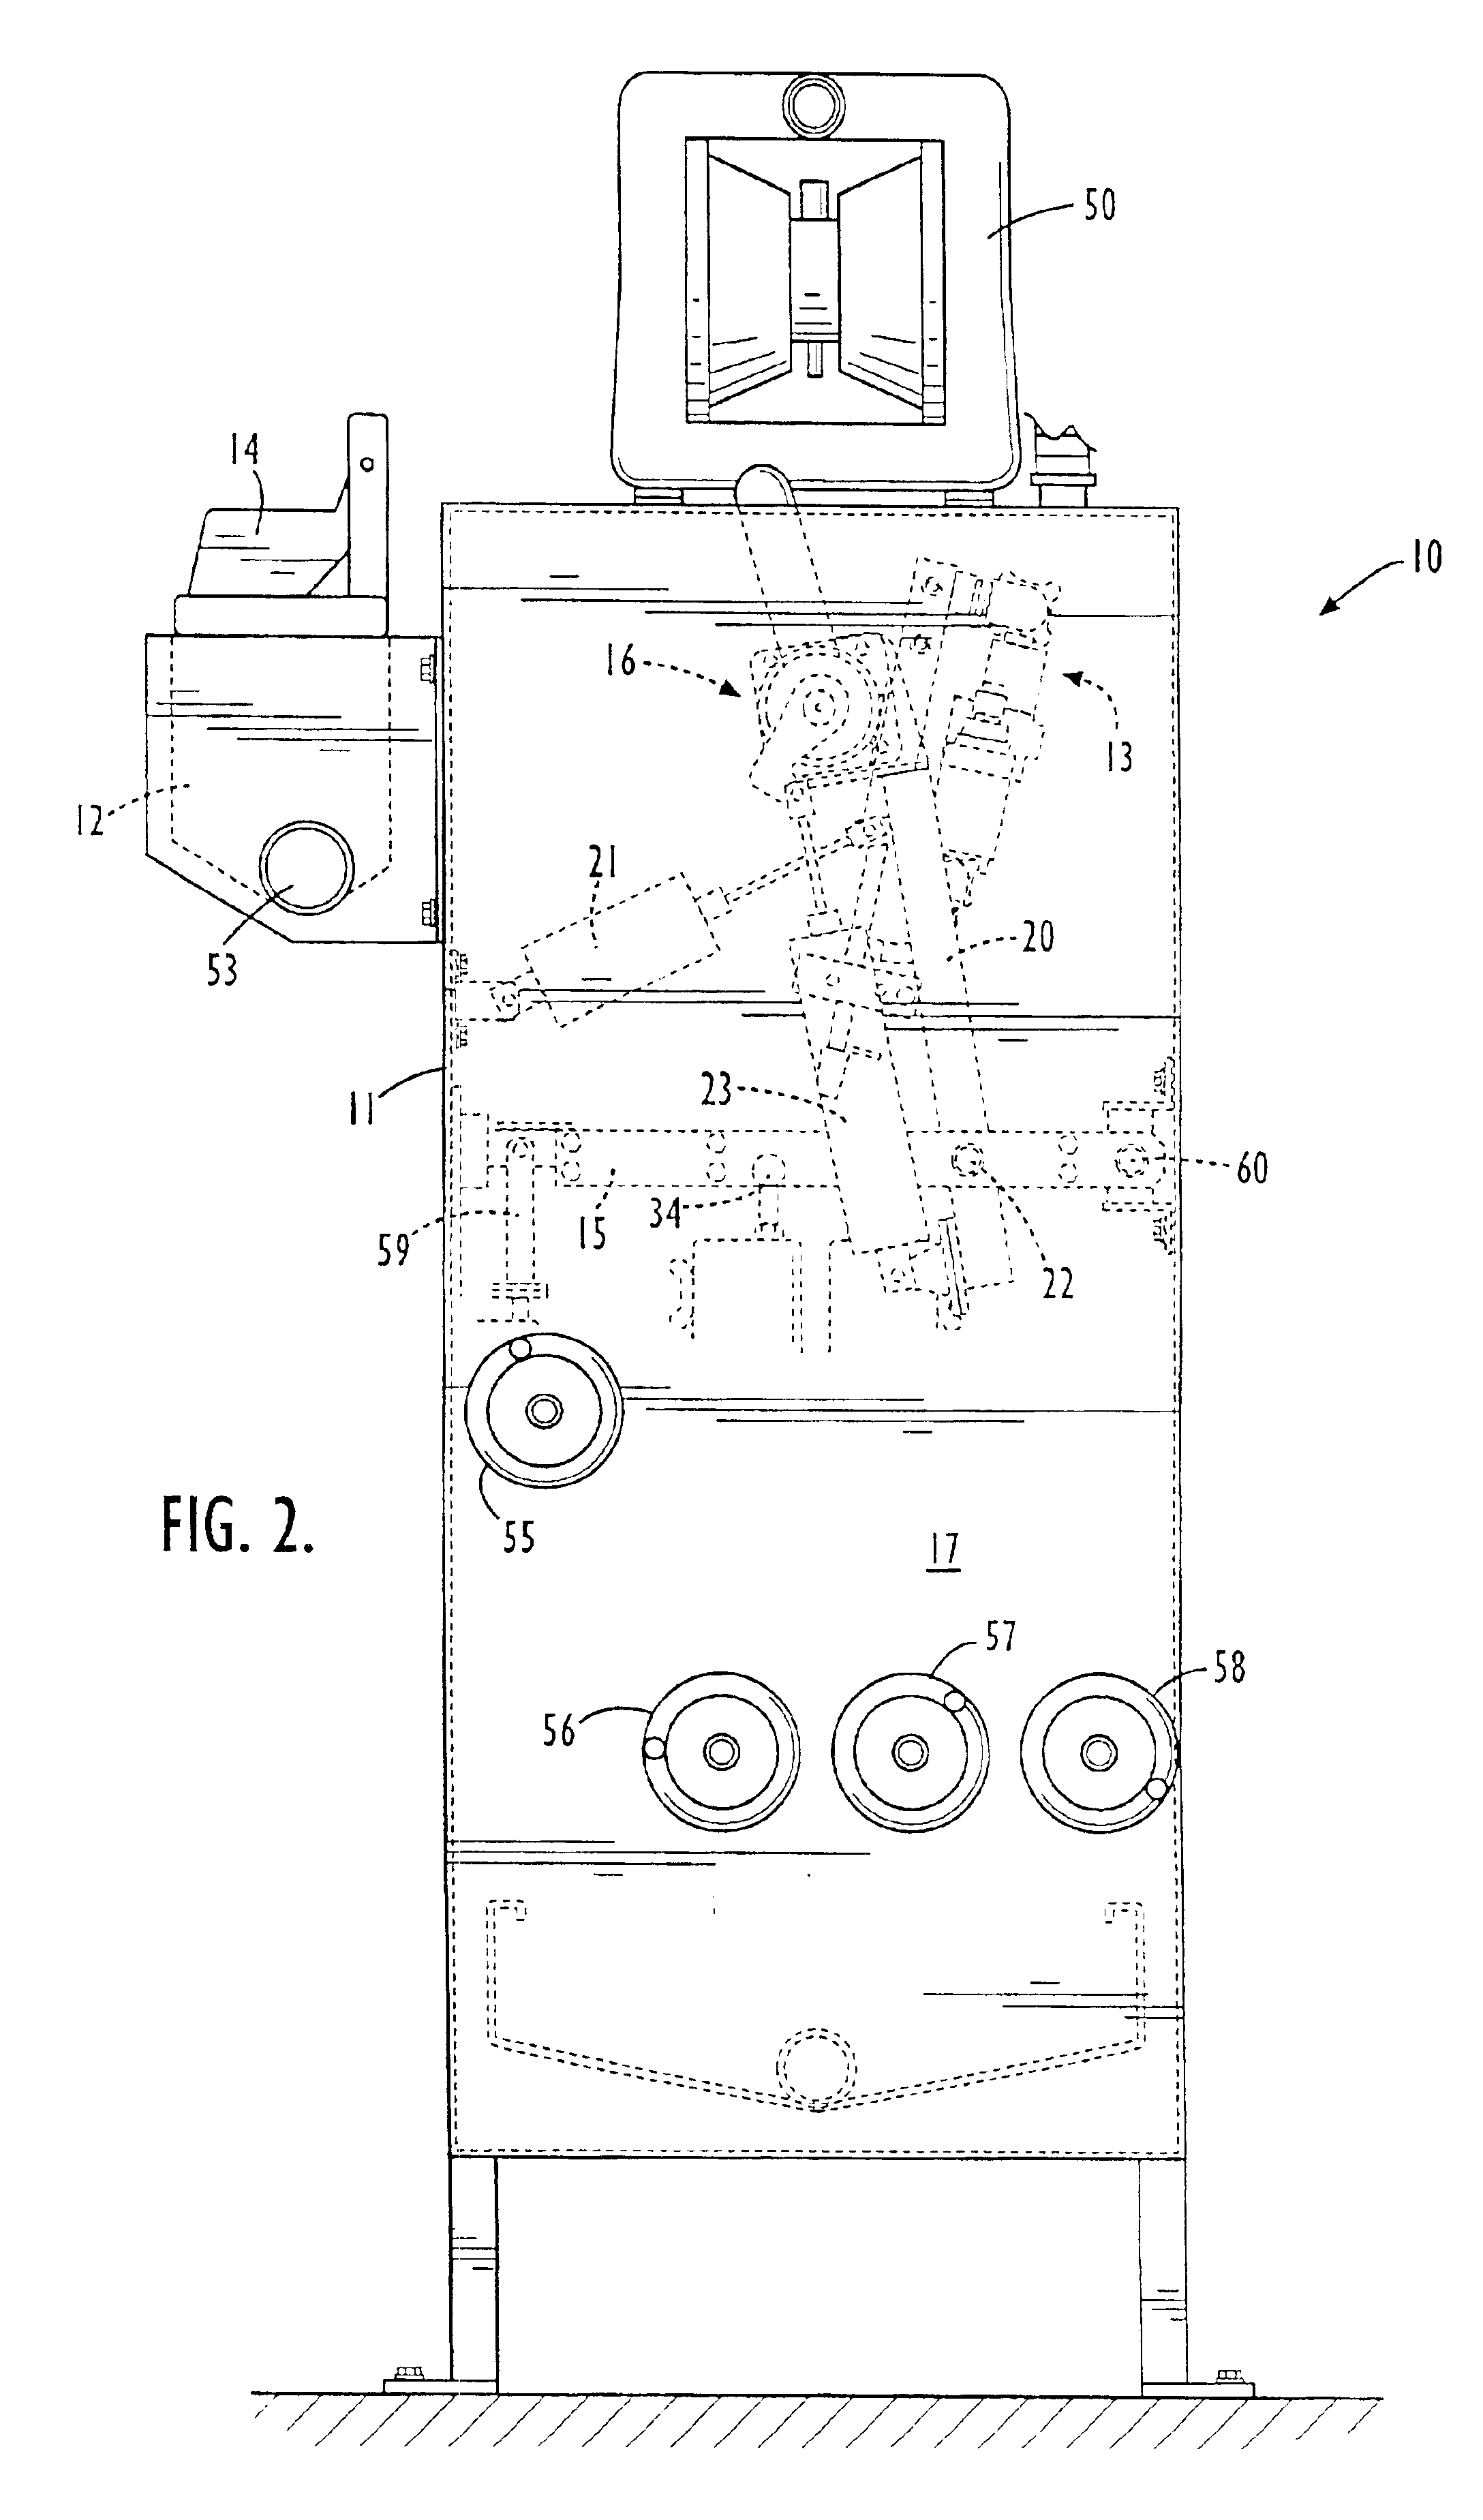 Apparatus for applying foamed coating material to a traveling textile substrate